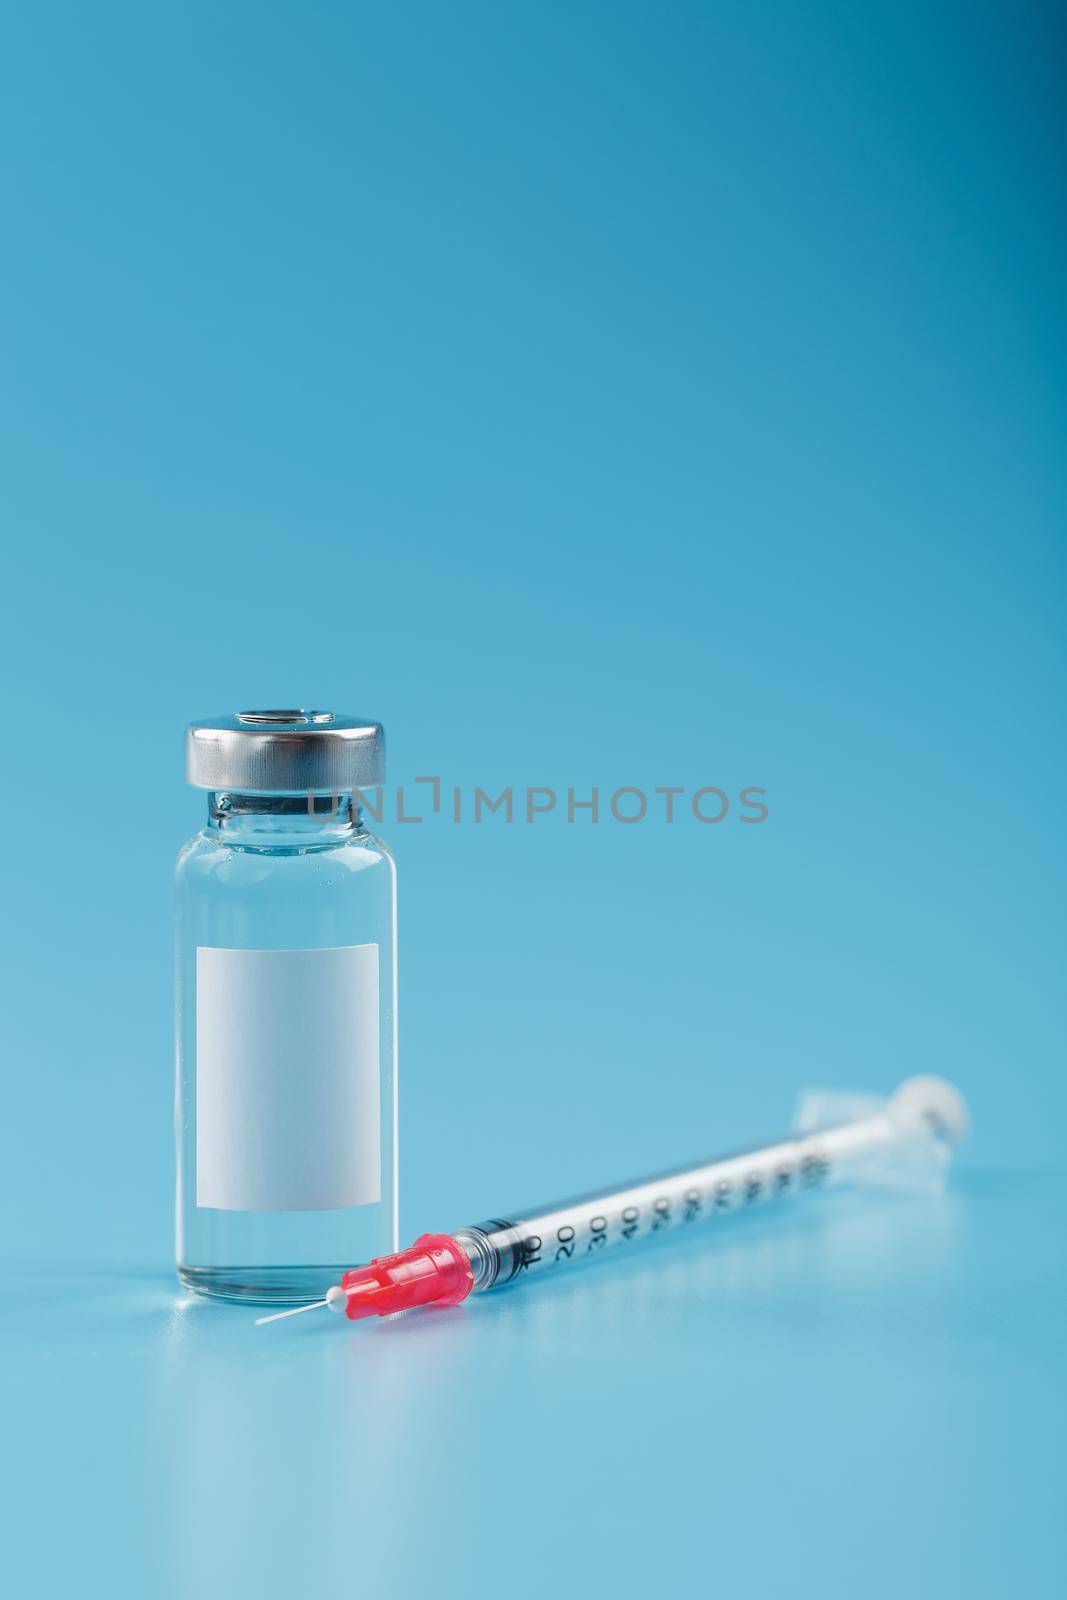 Syringe and ampoule with a vaccine against viruses and diseases on a blue background. Free space on the ampoule label for text, vertical frame